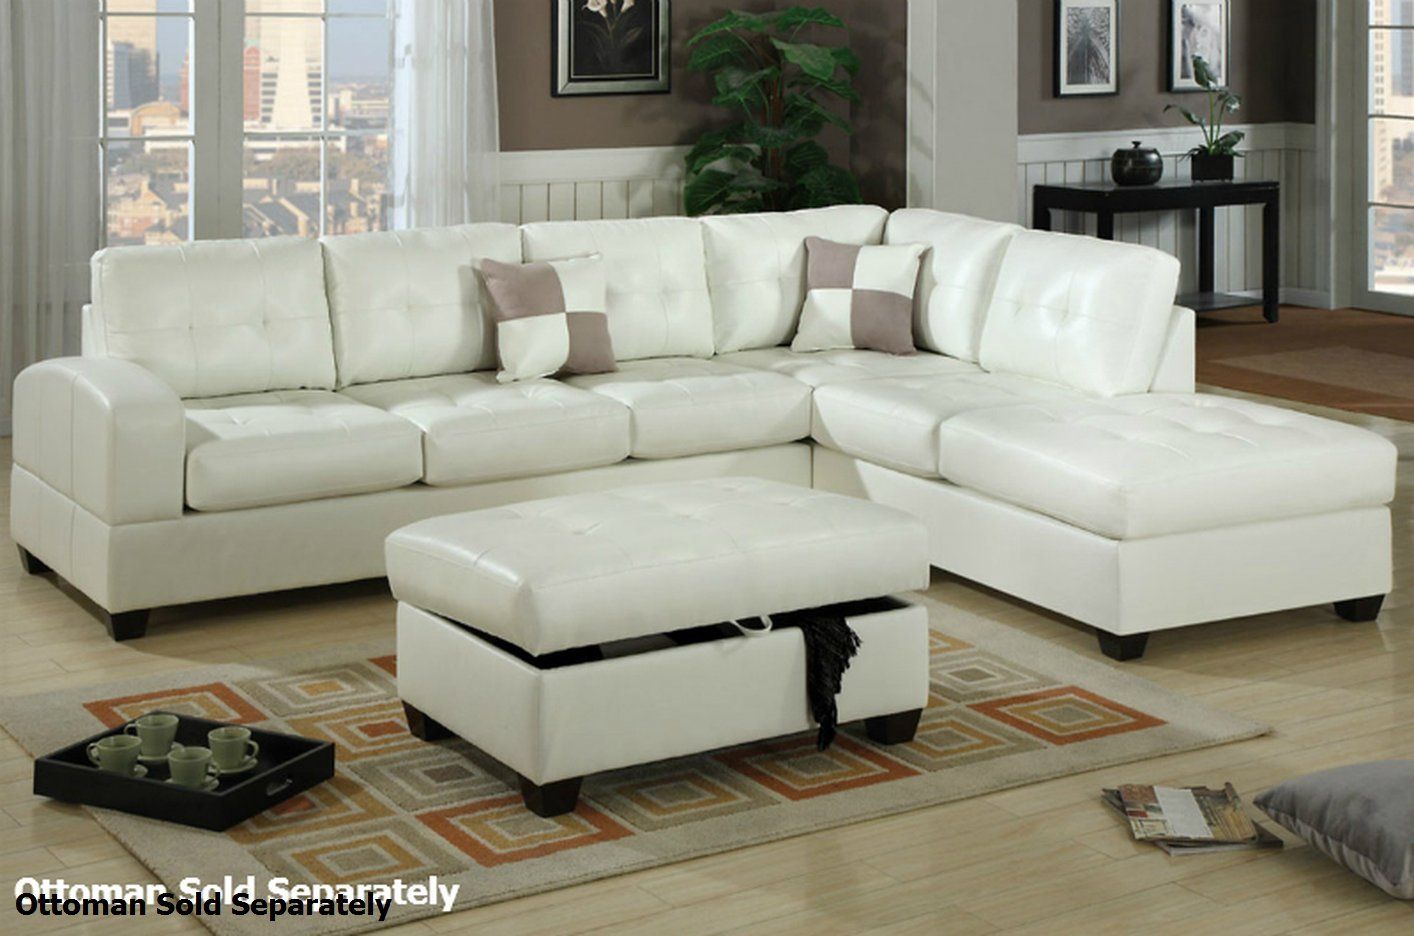 Poundex Reese F7359 White Leather Sectional Sofa – Steal A With Regard To Sectional Sofas In White (View 5 of 15)